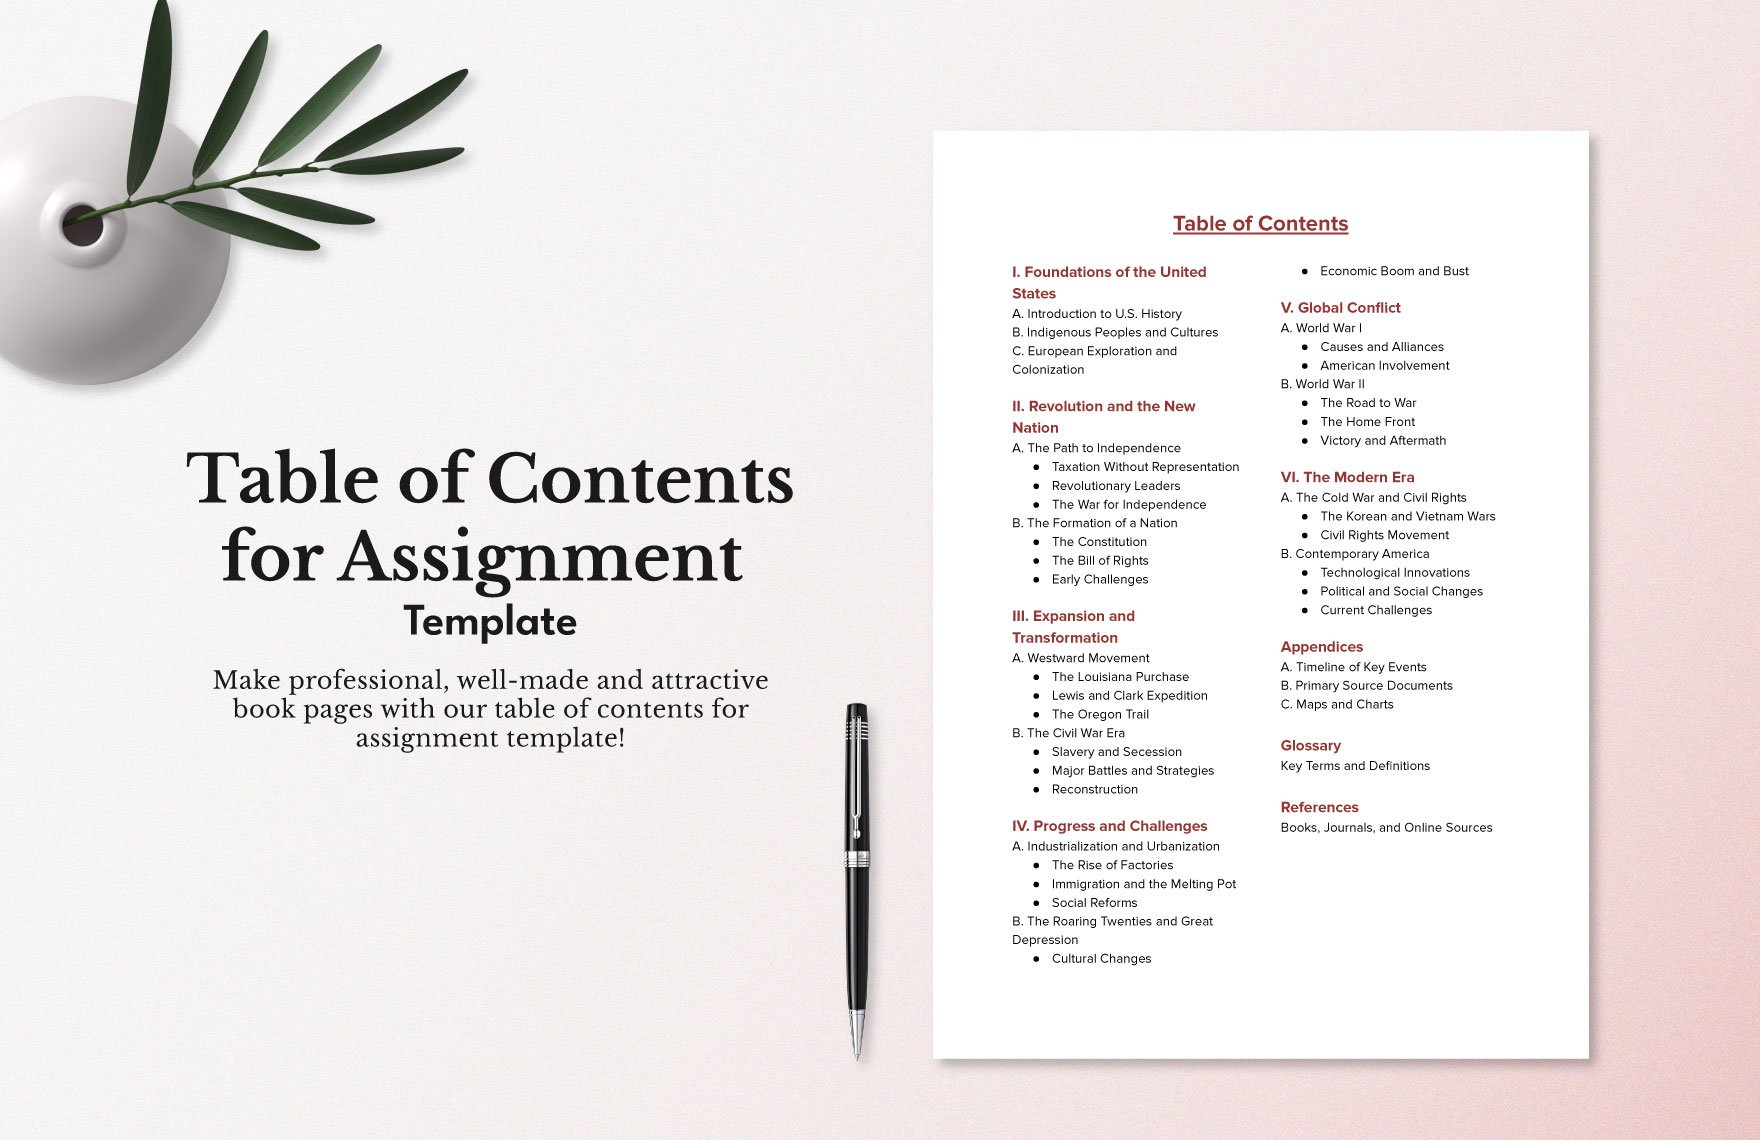 Table of Contents for Assignment Template